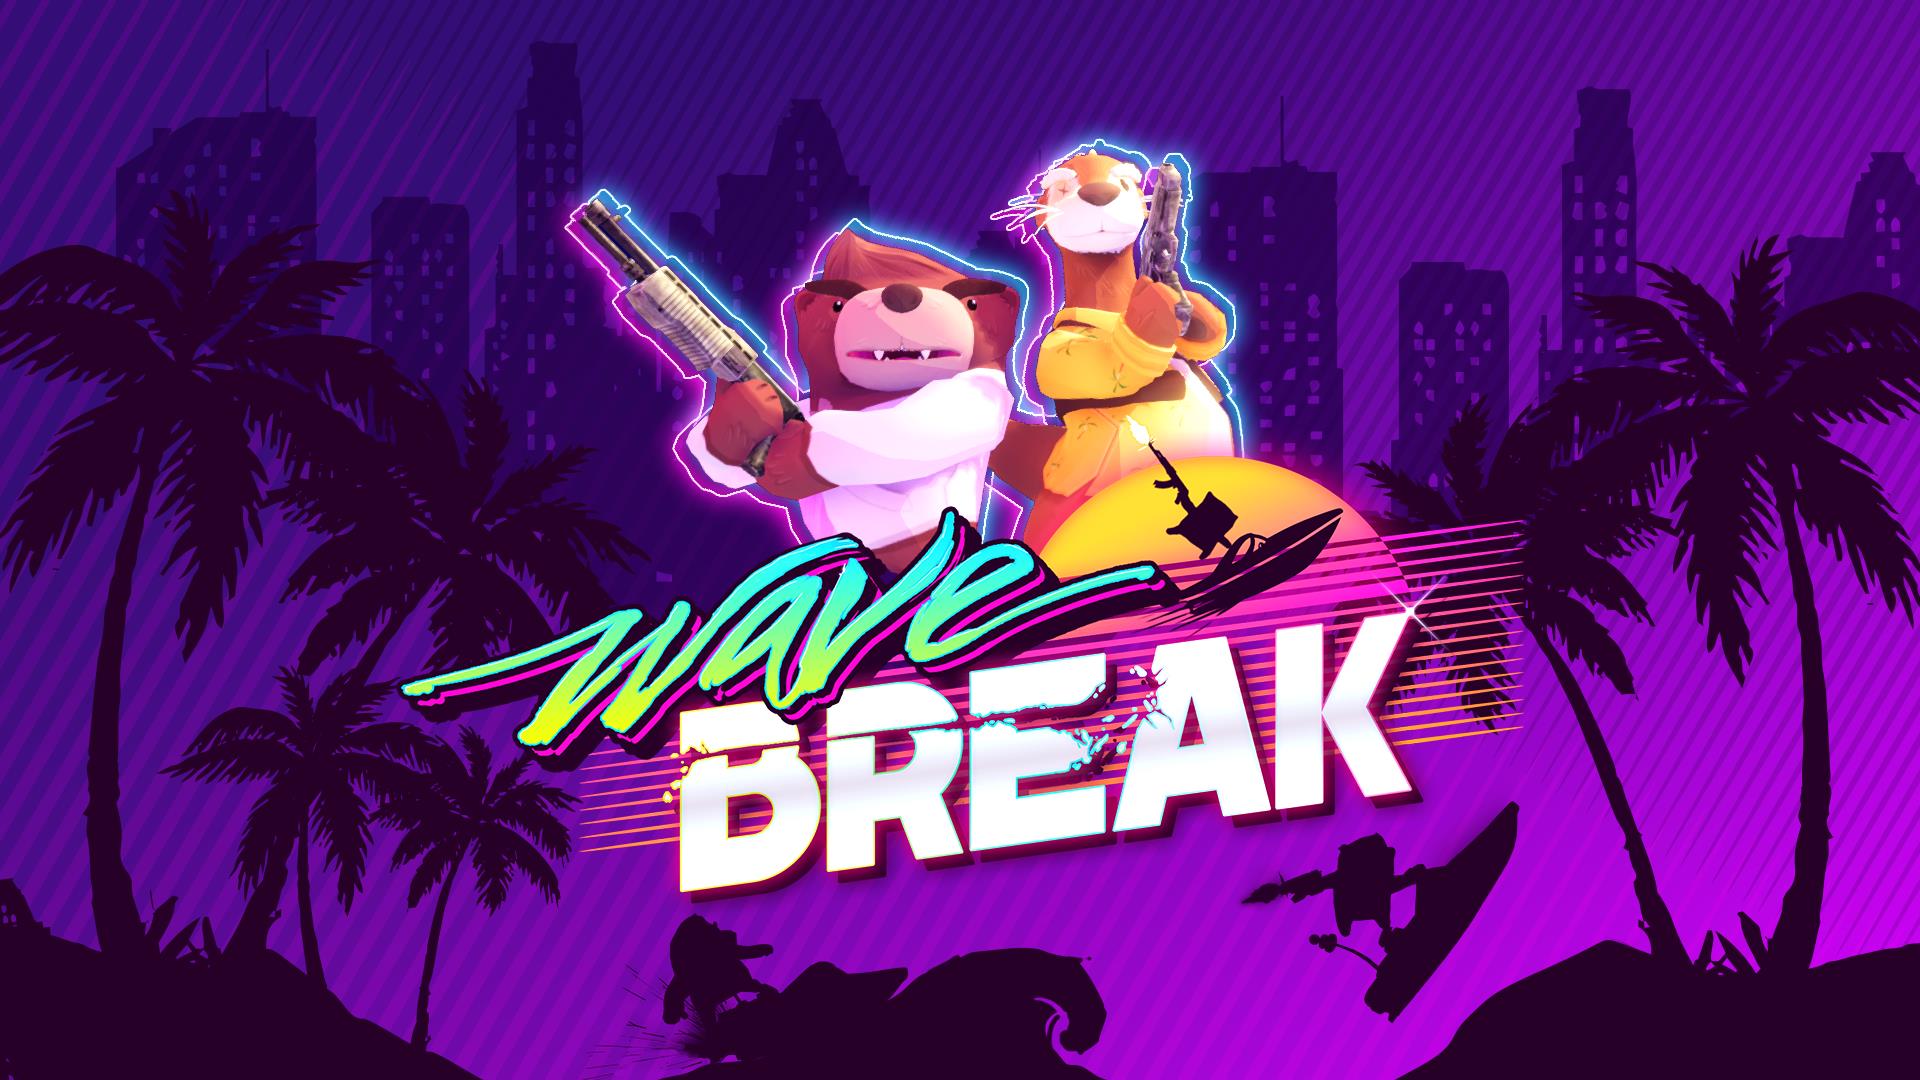 Image for Wave Break is a skateboarding game, except you're riding boats and shooting guns